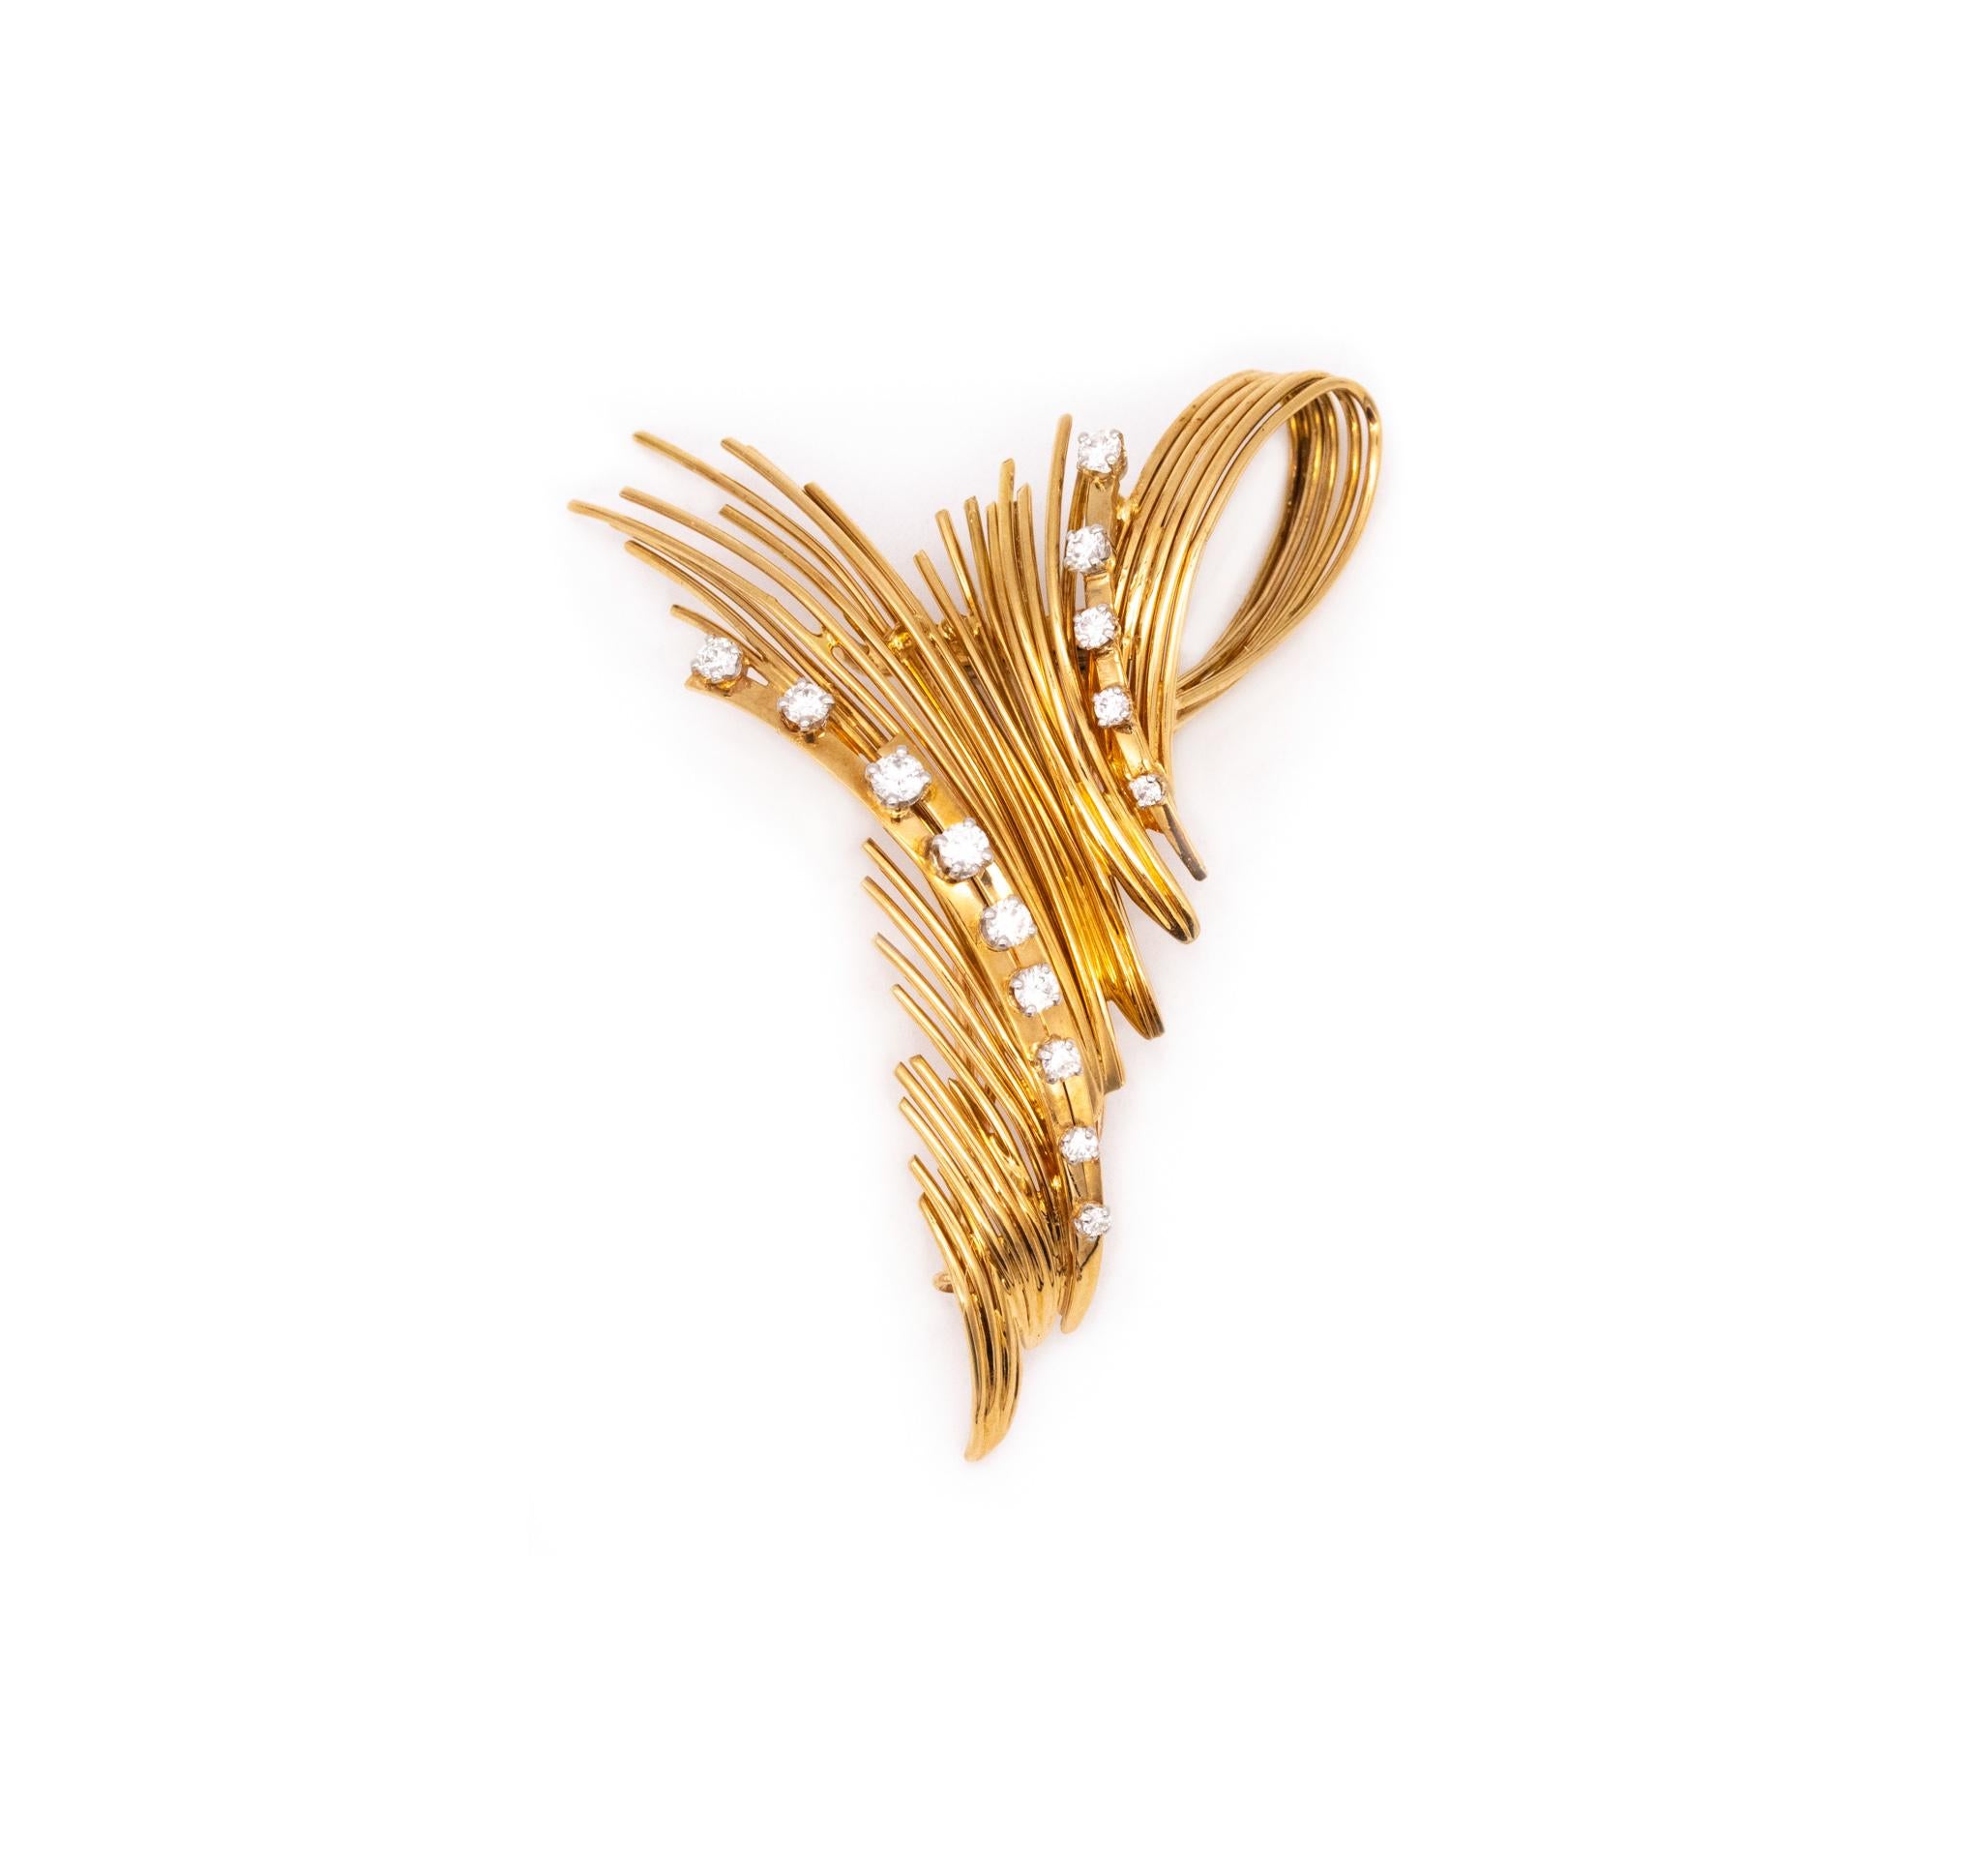 A brooch designed by George L'Enfant.

Beautiful piece created in Paris France at the atelier of George L'Enfant, in the late 1960's. This brooch was crafted in solid yellow gold of 18 karats, with white gold four-prong settings. Suited at the